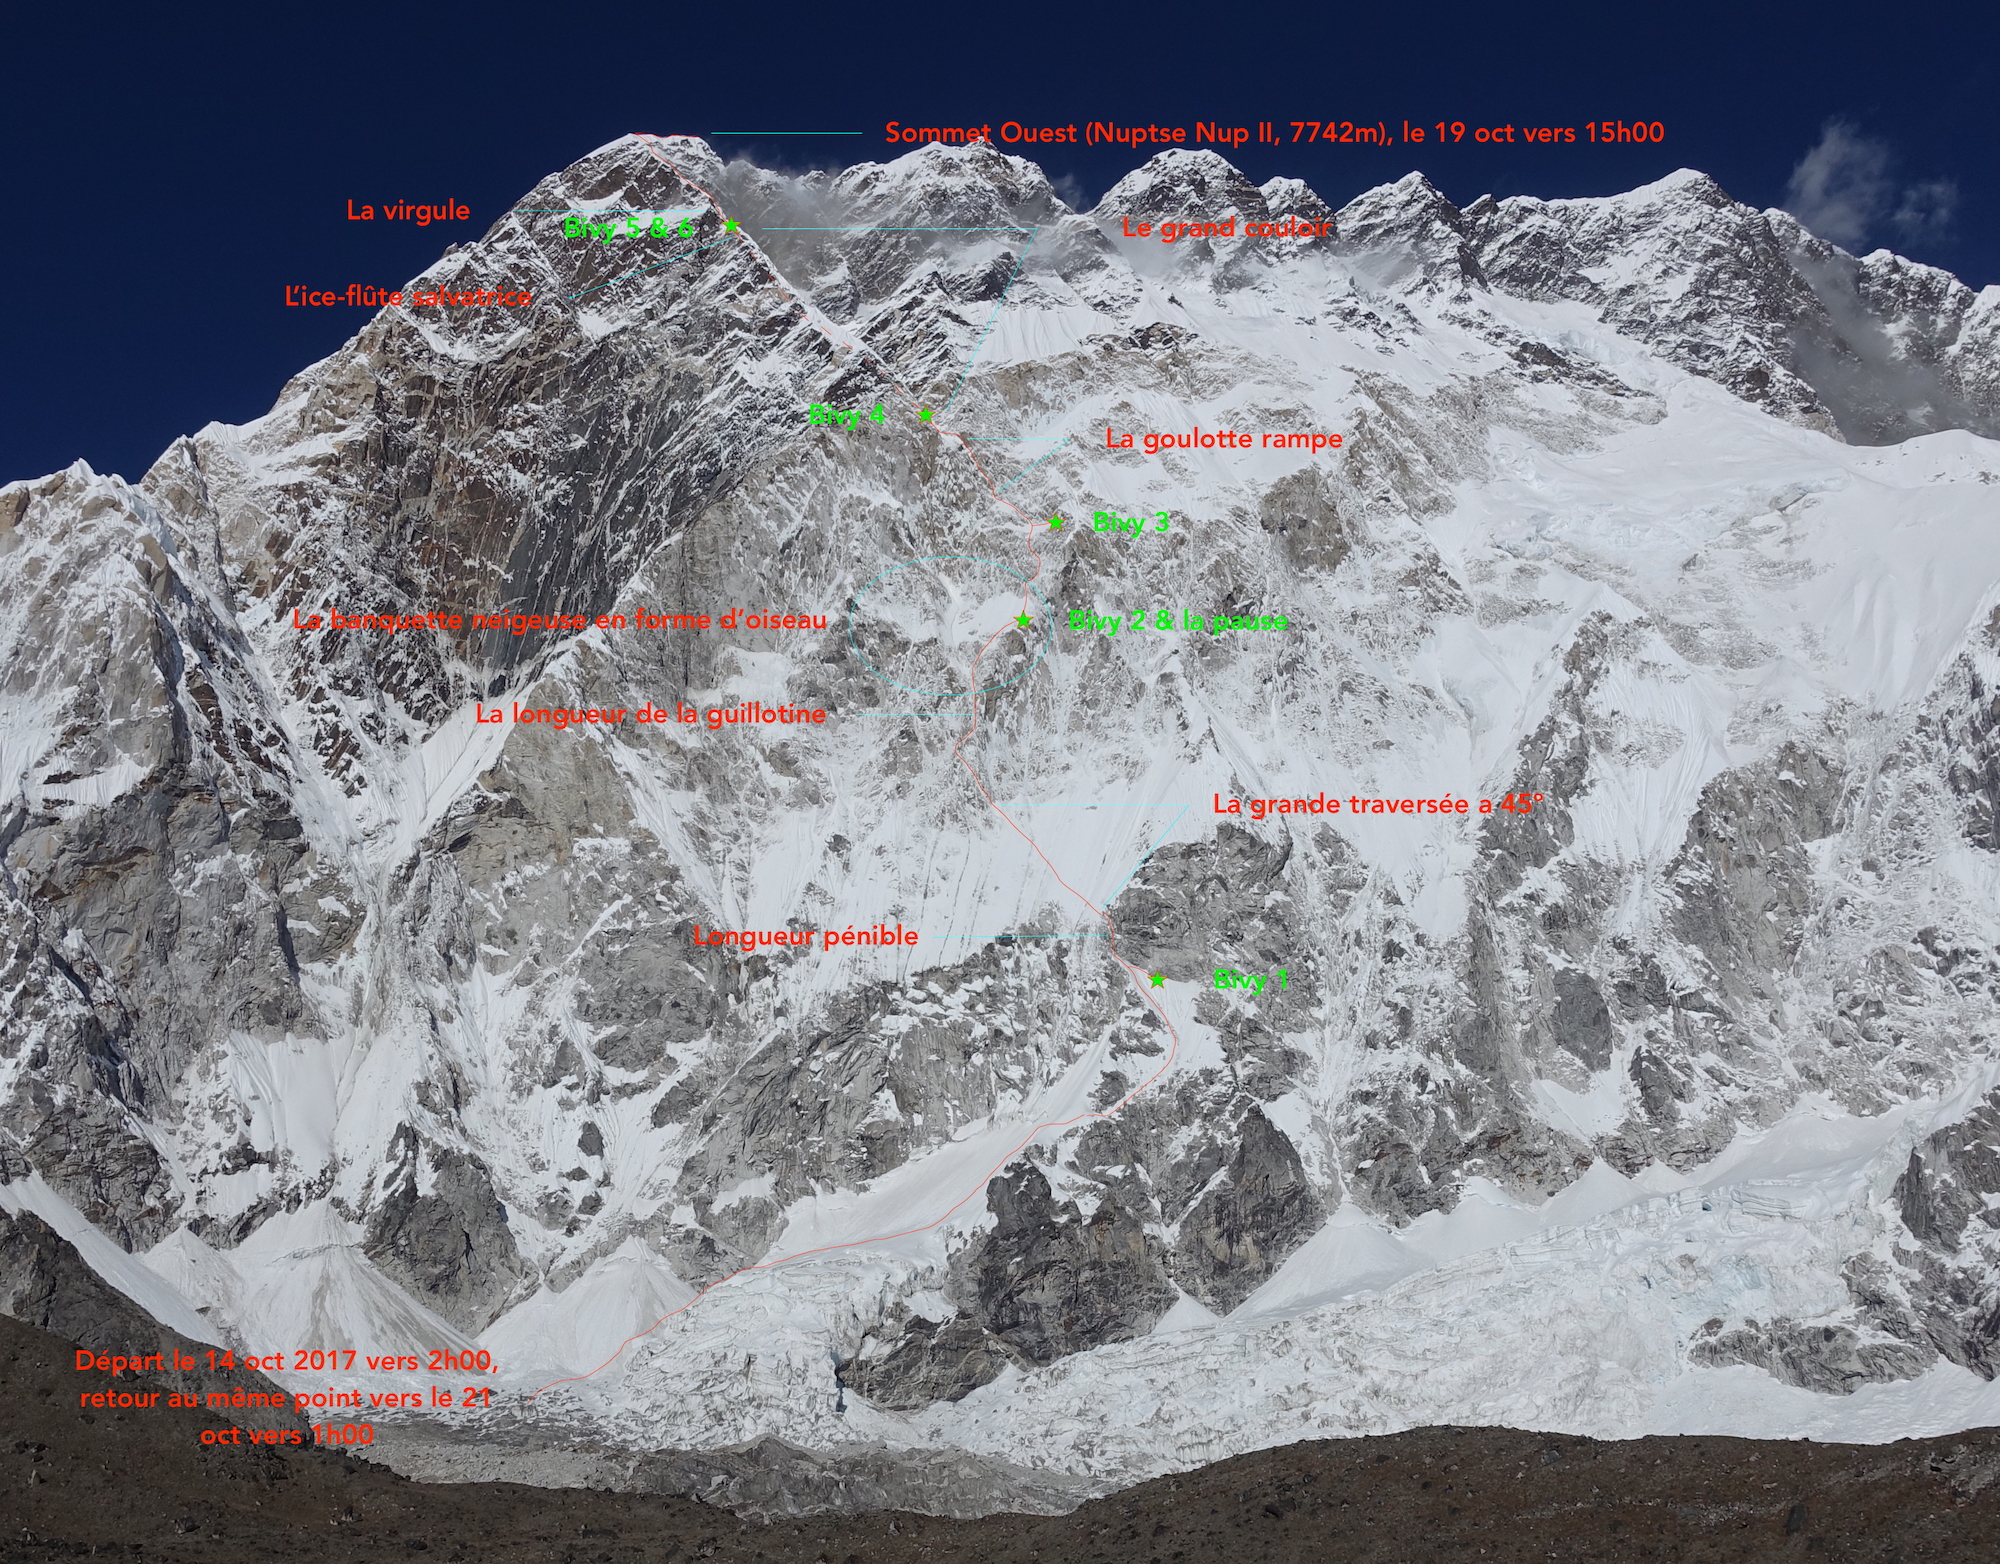 The south face of Nuptse with the new route marked by the thin red line. [Photo] Courtesy of Helias Millerioux, Benjamin Guigonnet, Frederic Degoulet